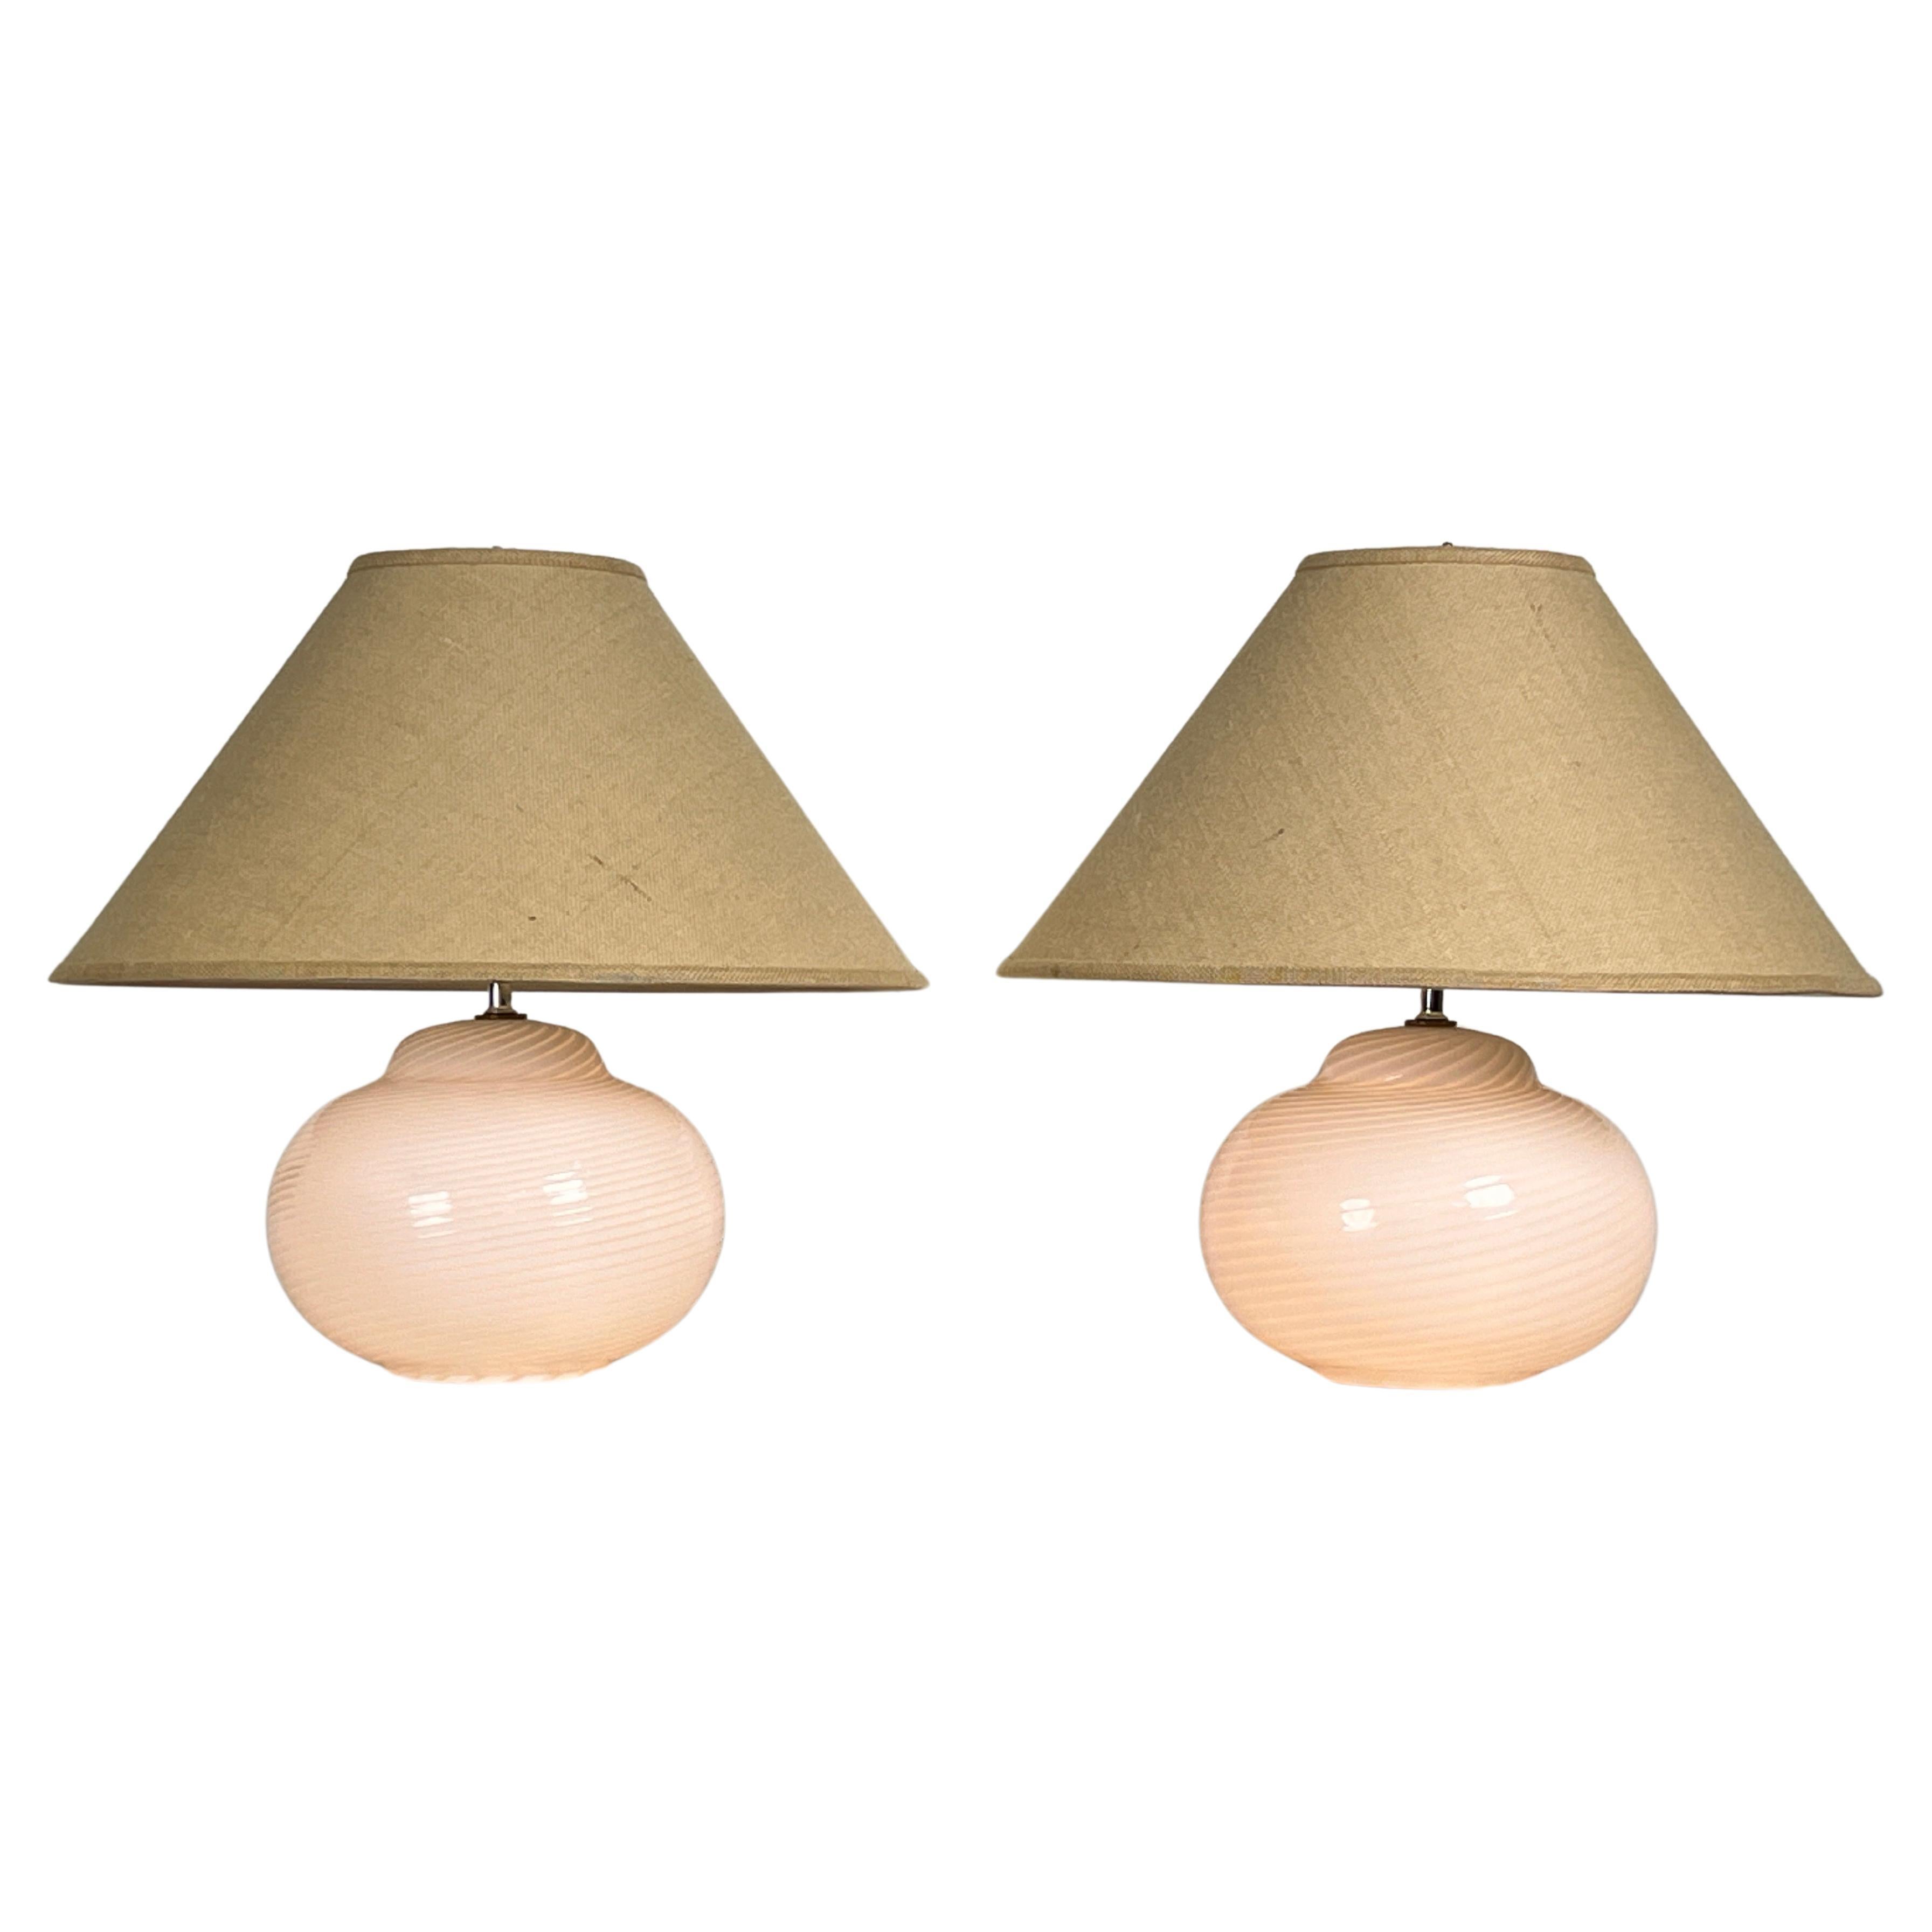 Pair of Murano Glass Table Lamps by Vetri